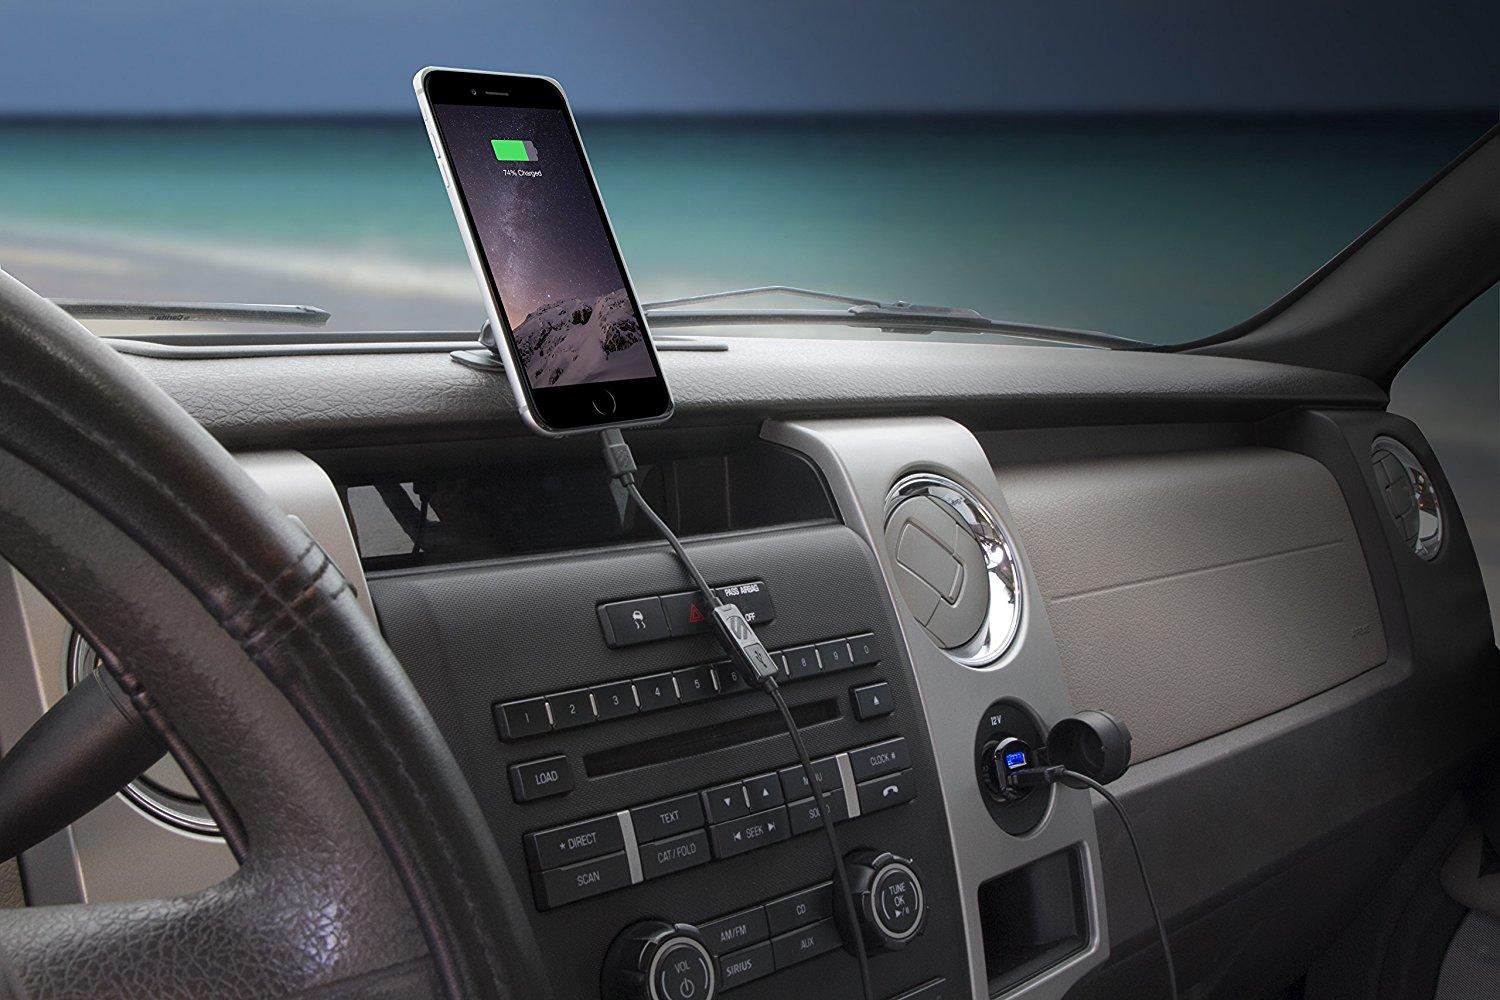 Upgrade Your Beloved Car With These 25 Cool Car Accessories